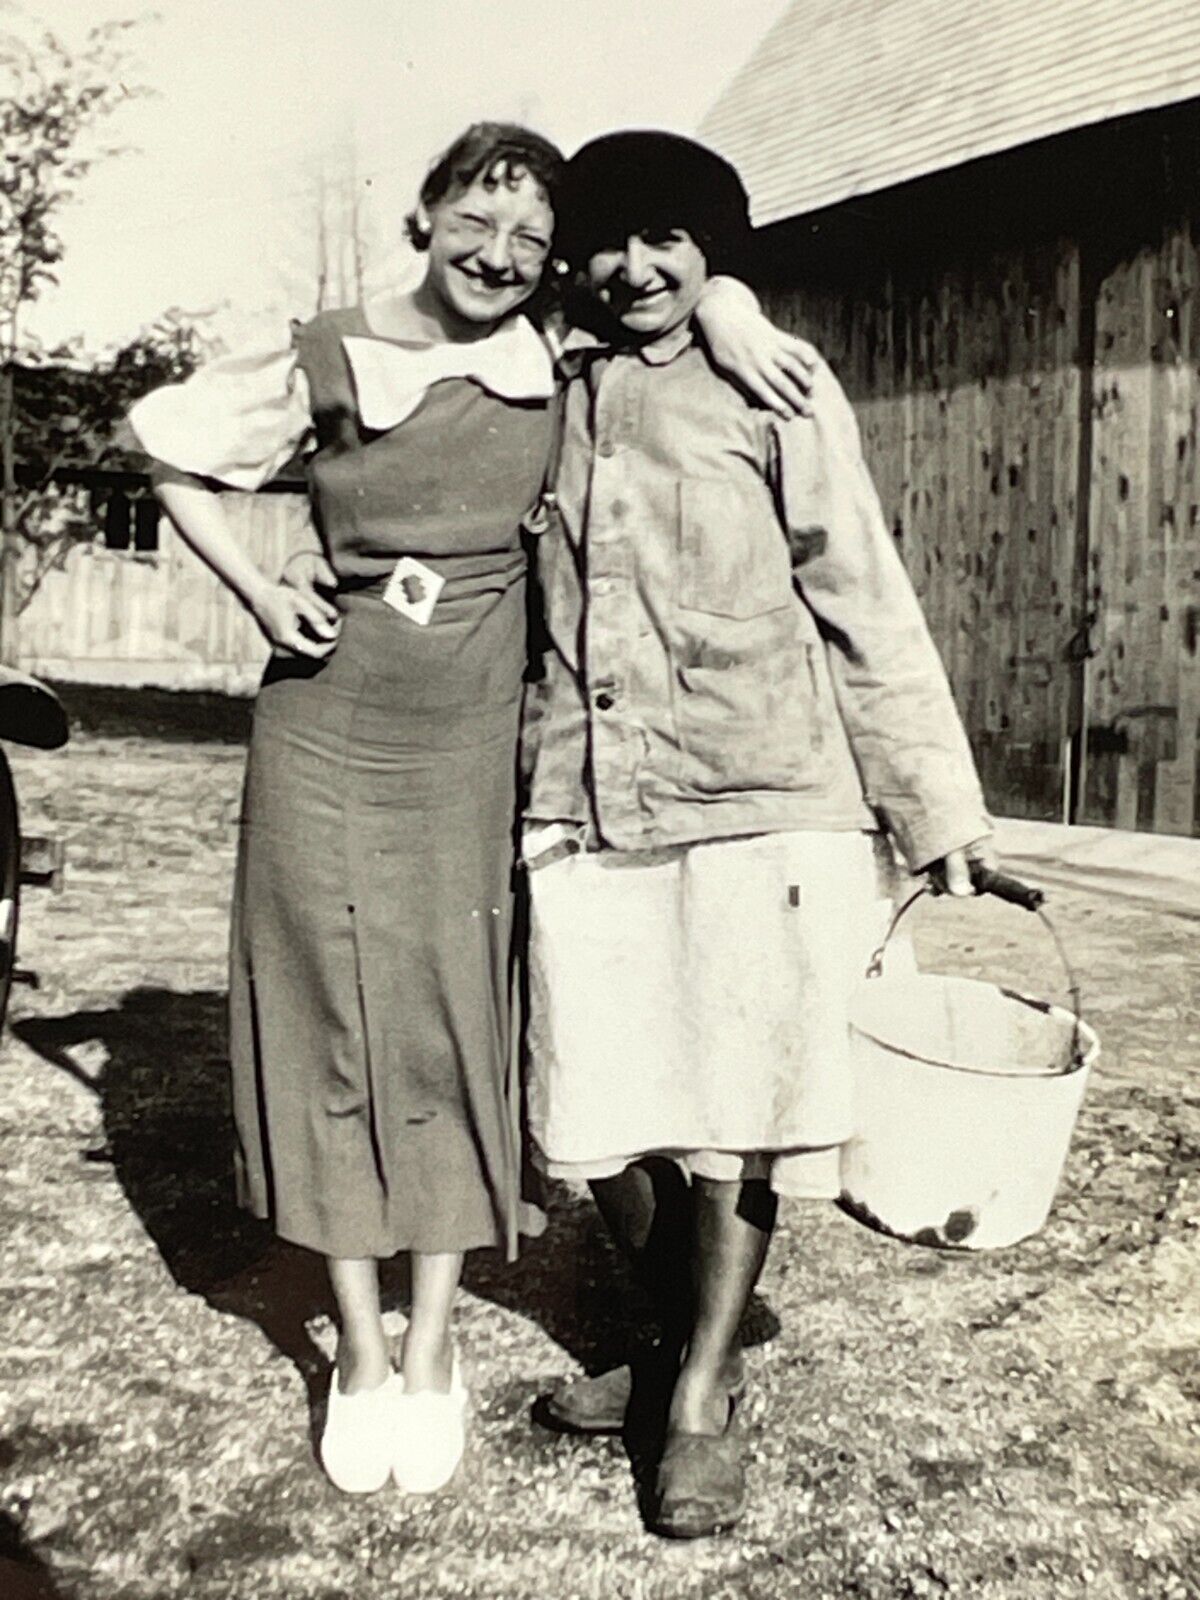 YD Photograph 1935 Embrace Young Women Holding Bucket Farm